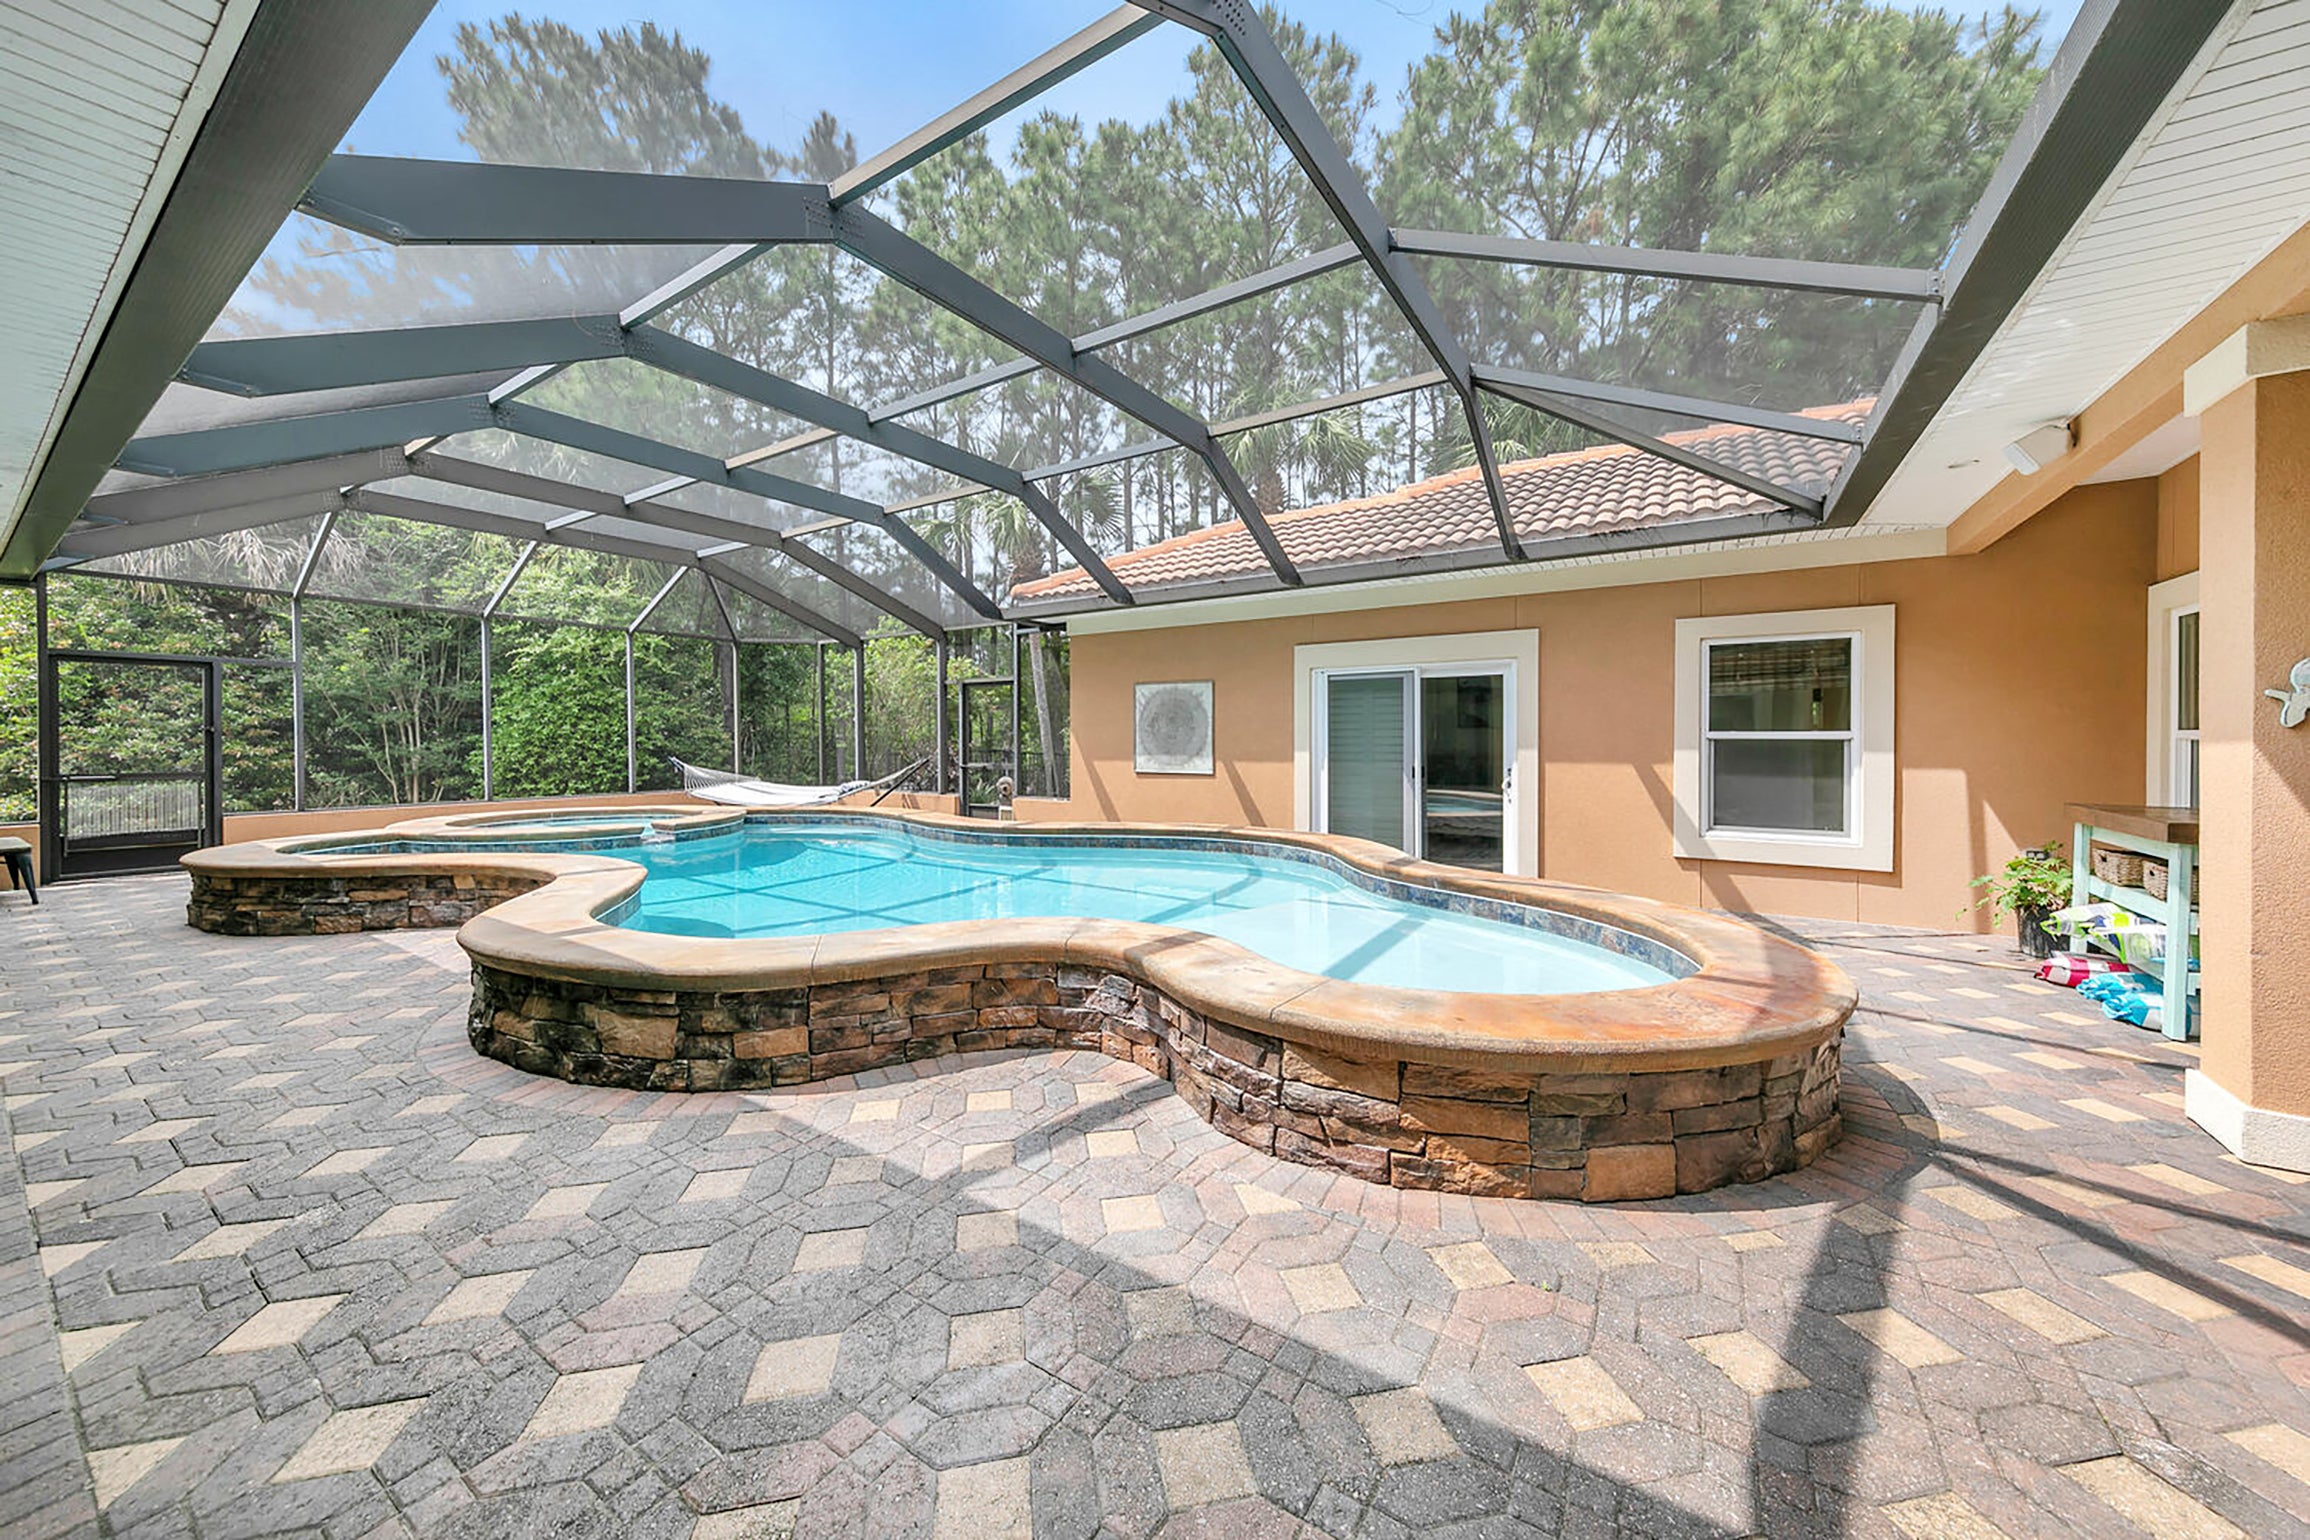 Screened in pool and hot tub